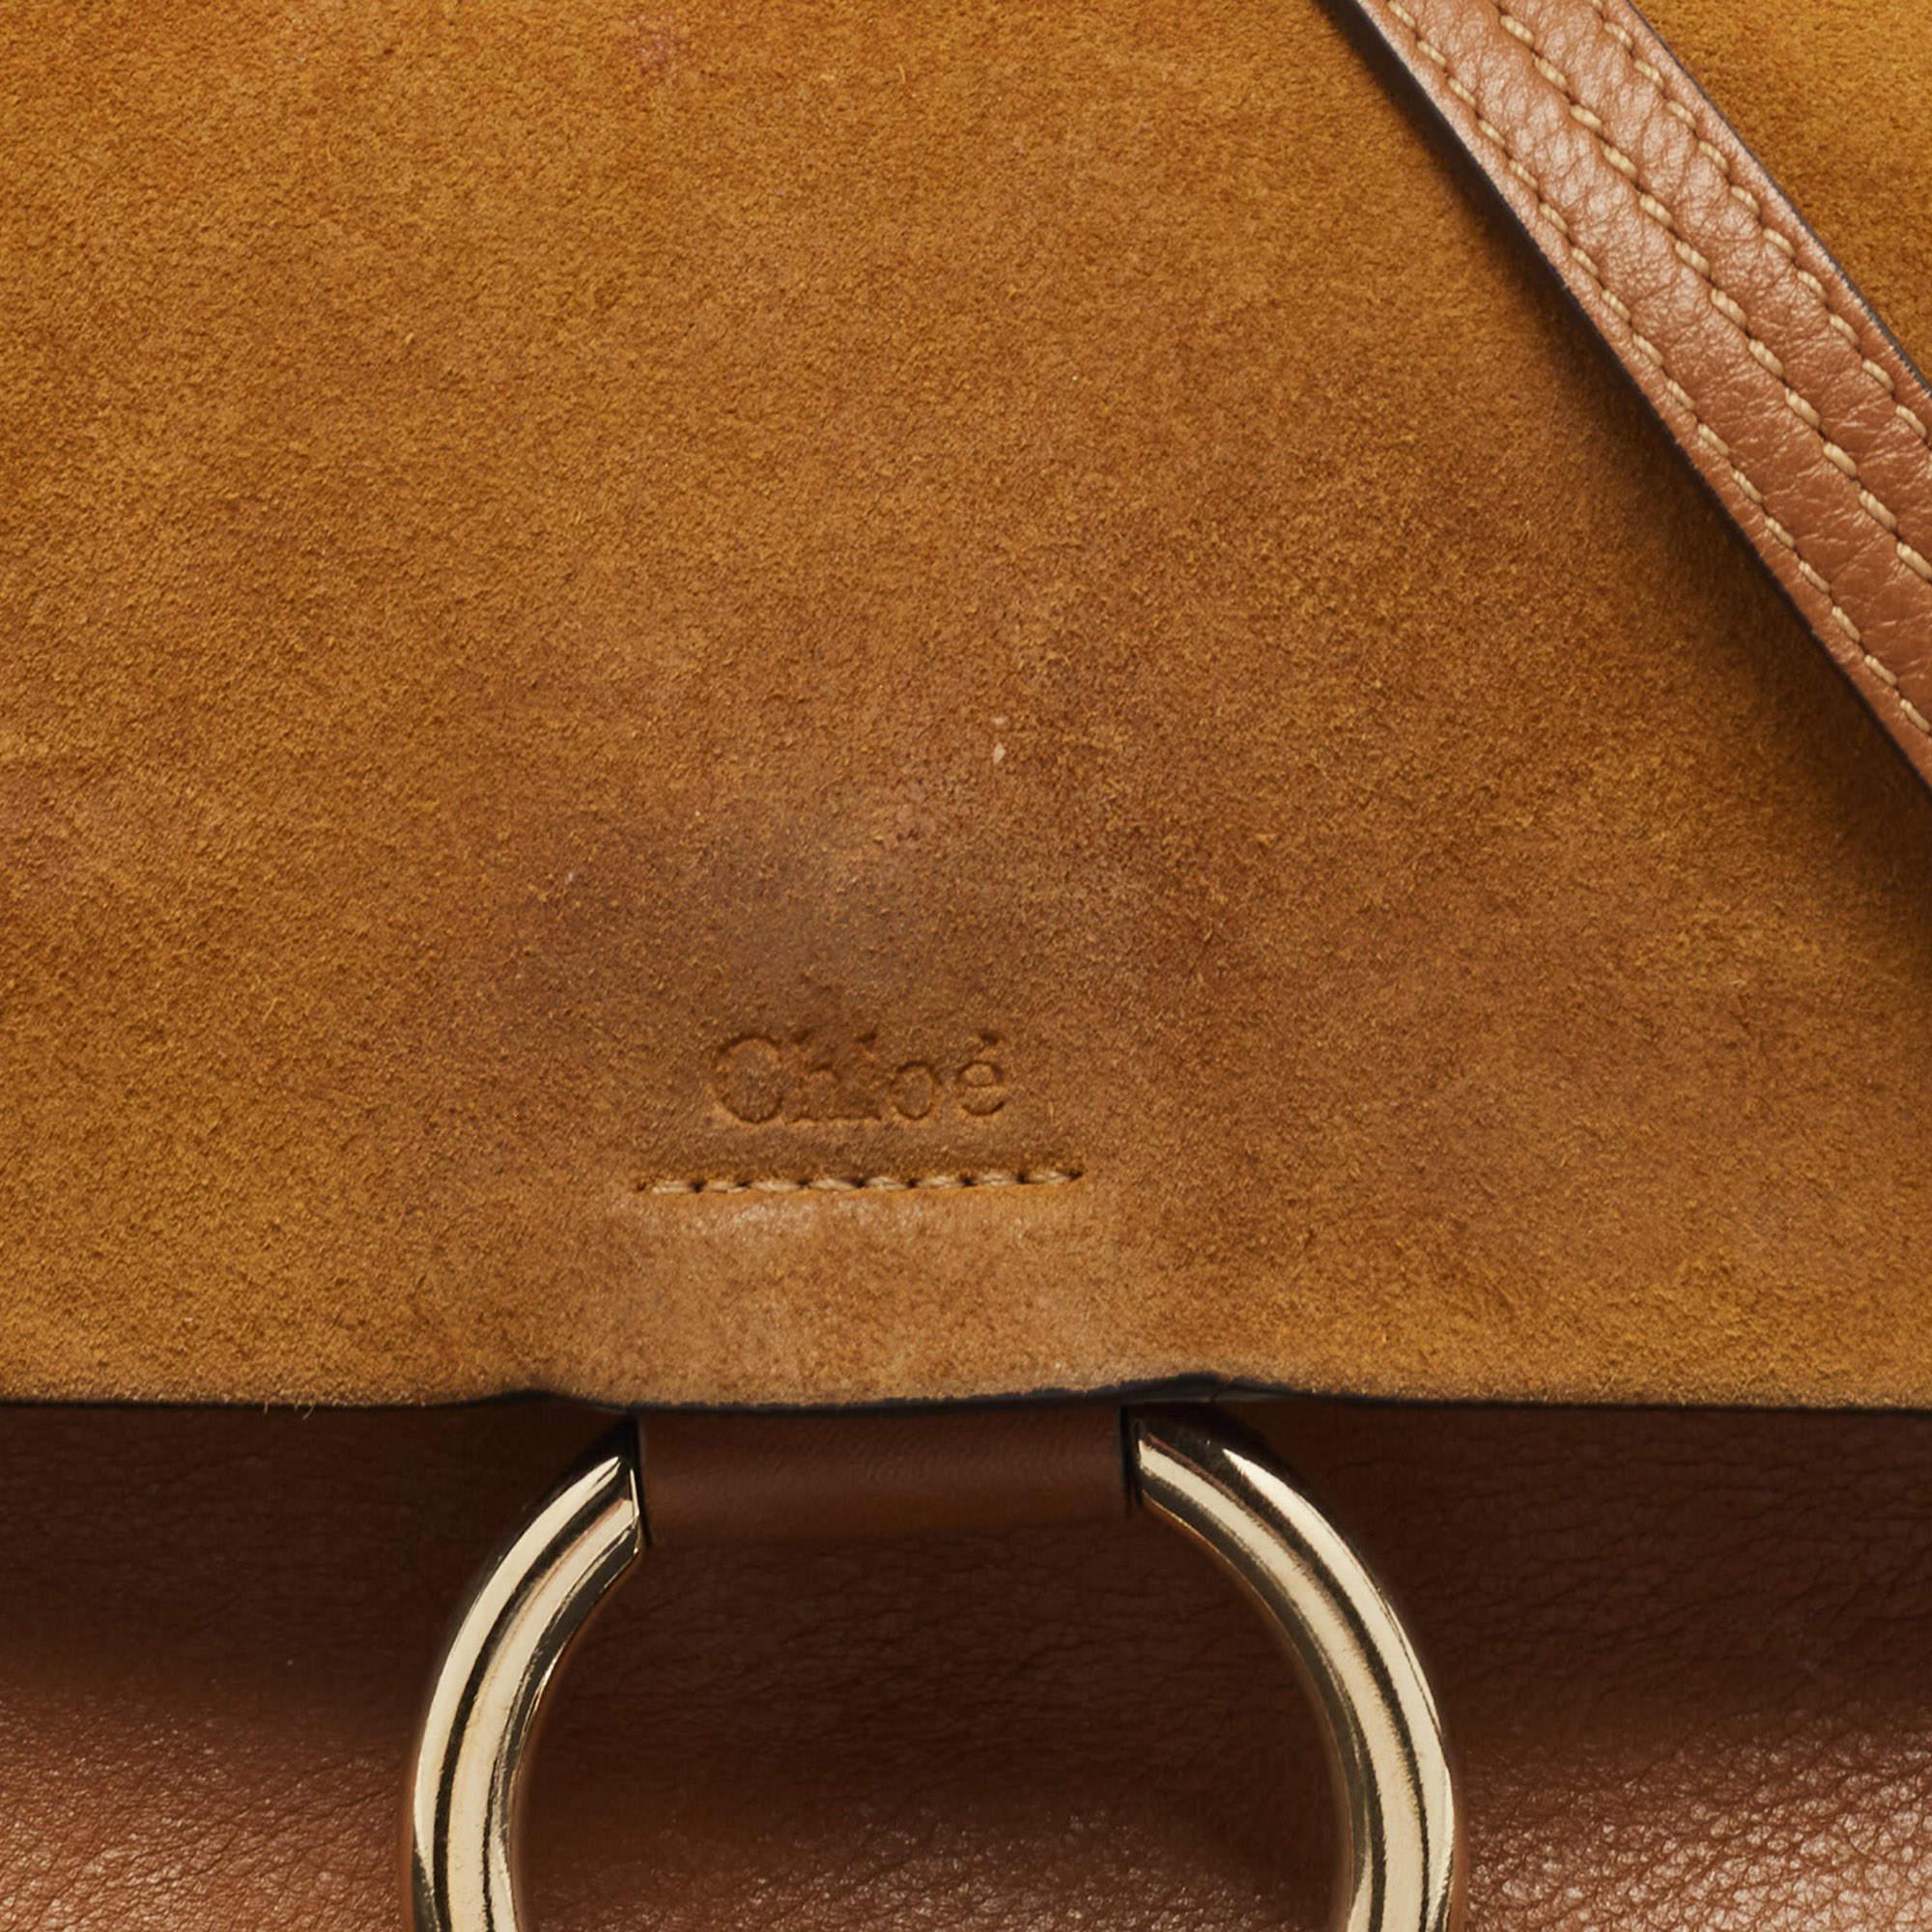 Chloe Brown/Tan Leather and Suede Small Faye Shoulder Bag 3